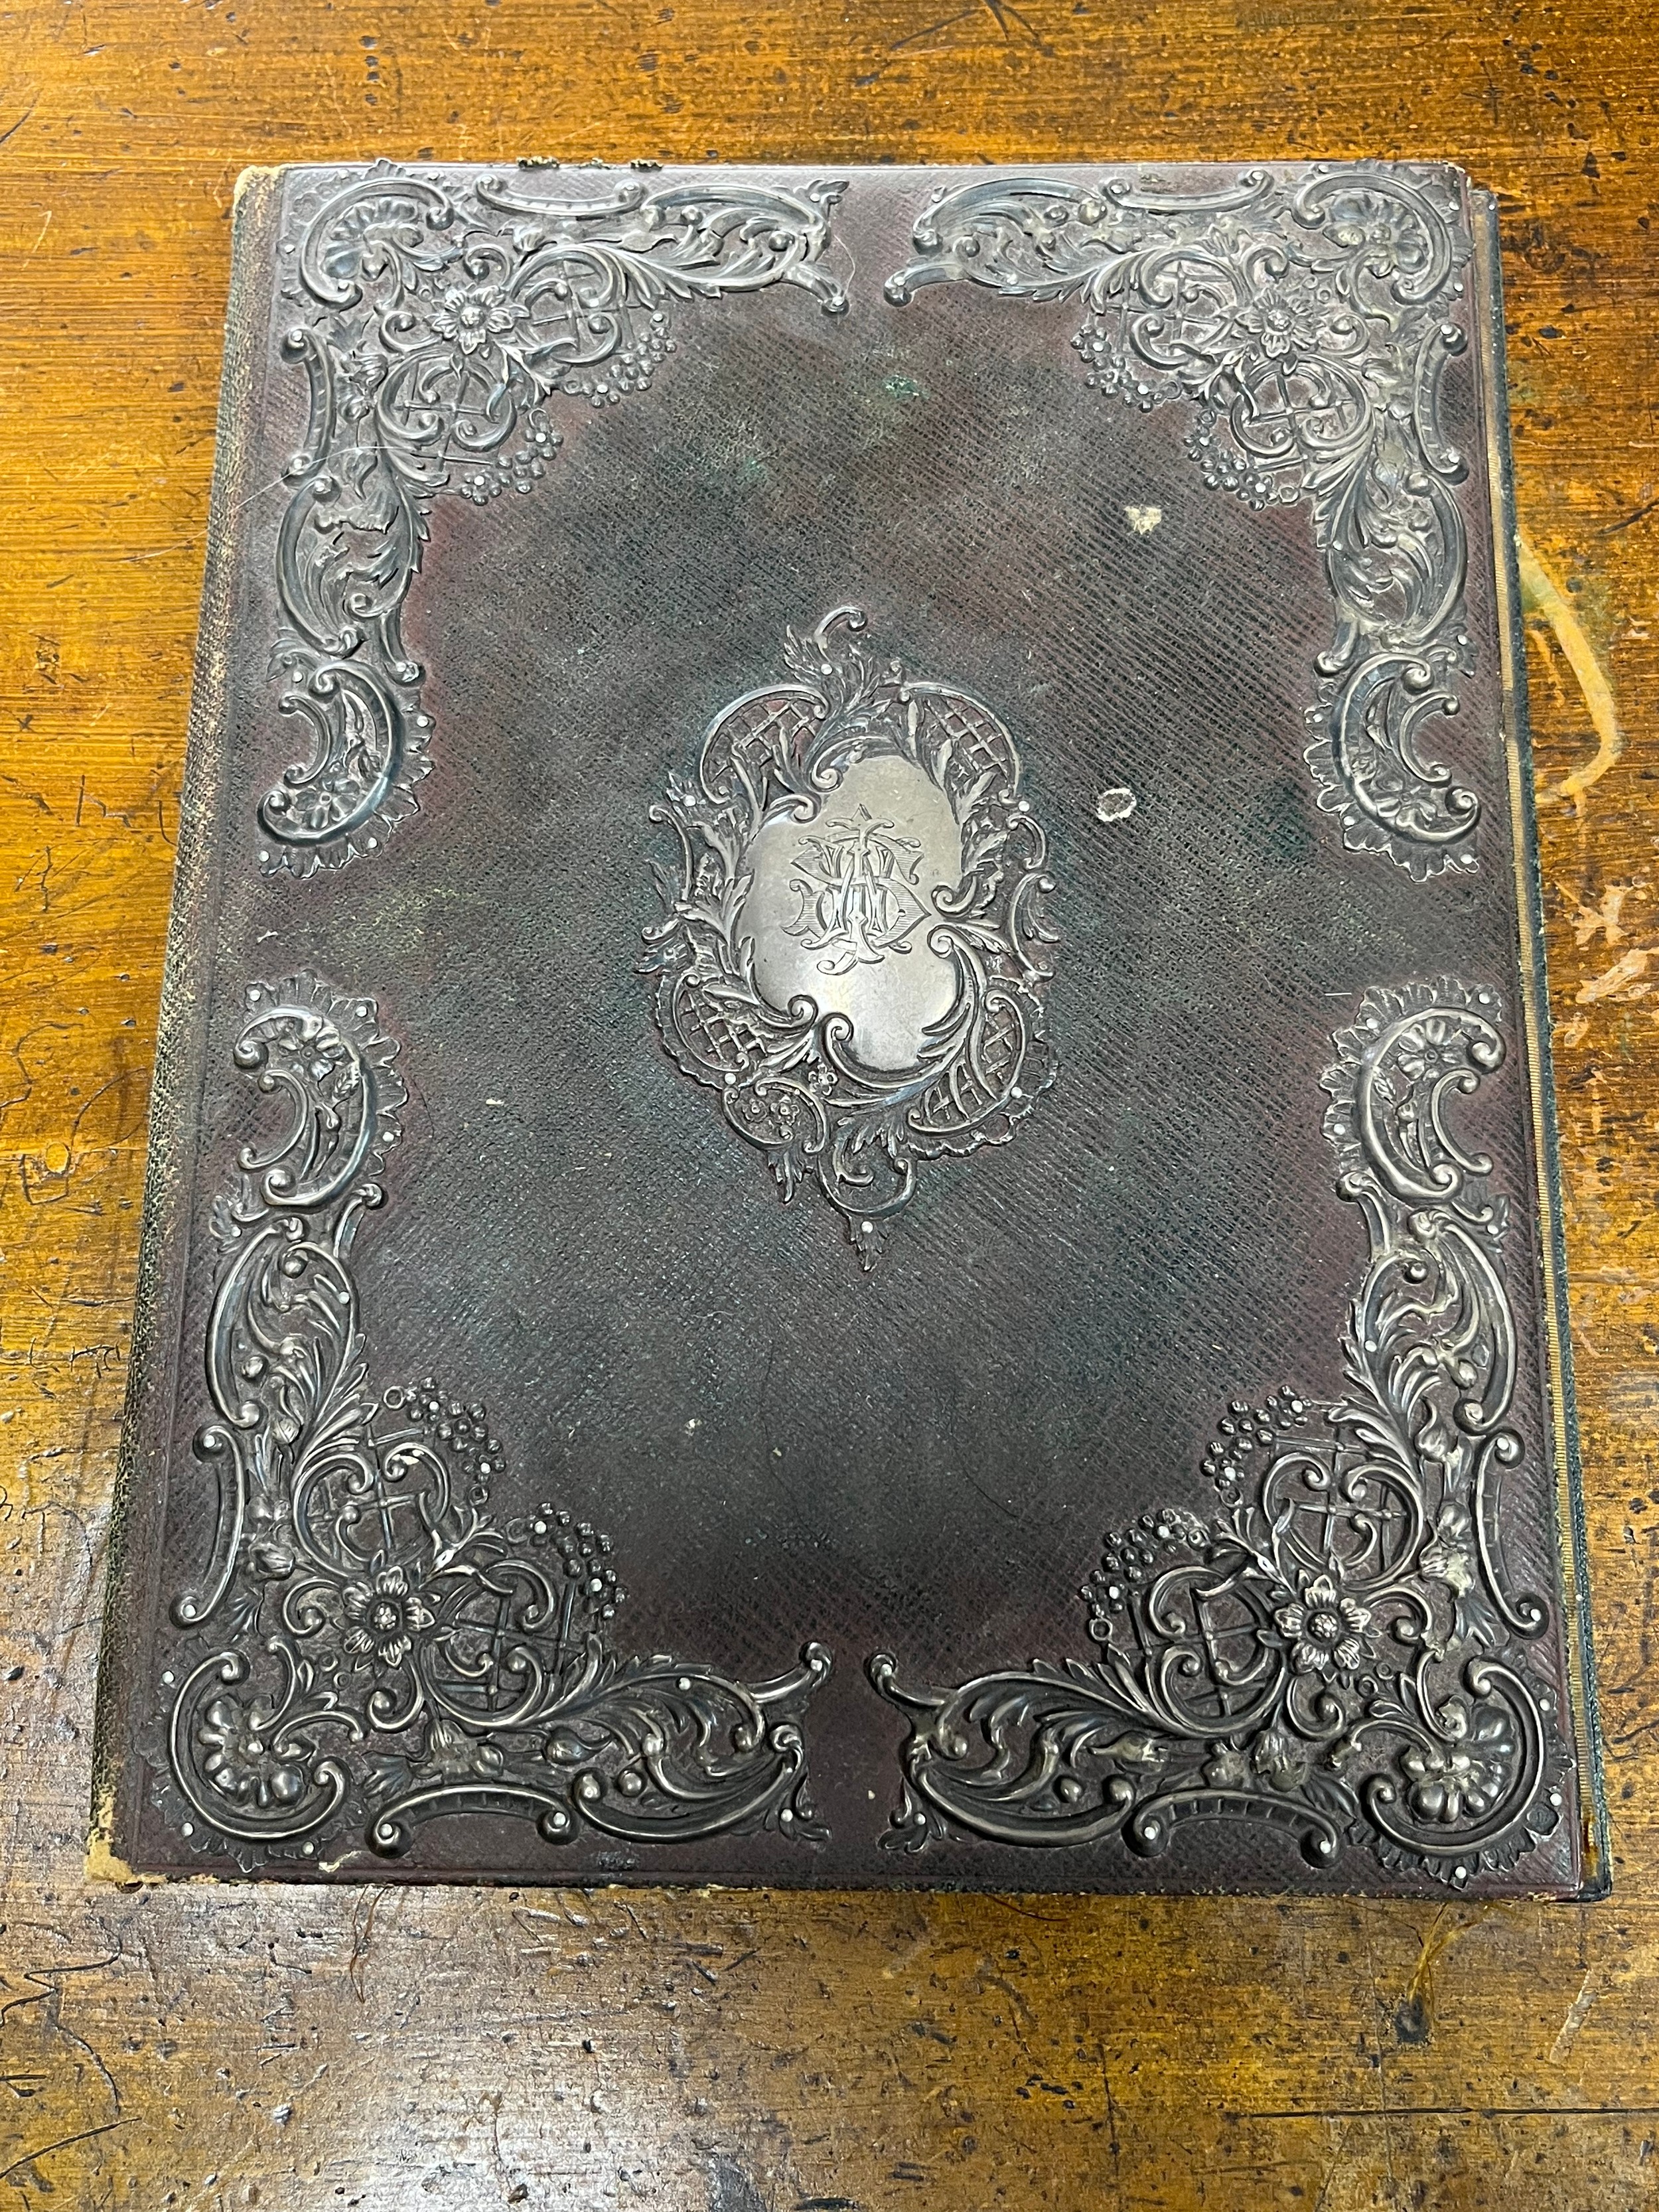 Antique London silver and leather bound stationary blotter. Silver produced by J Batson & Son (Henry